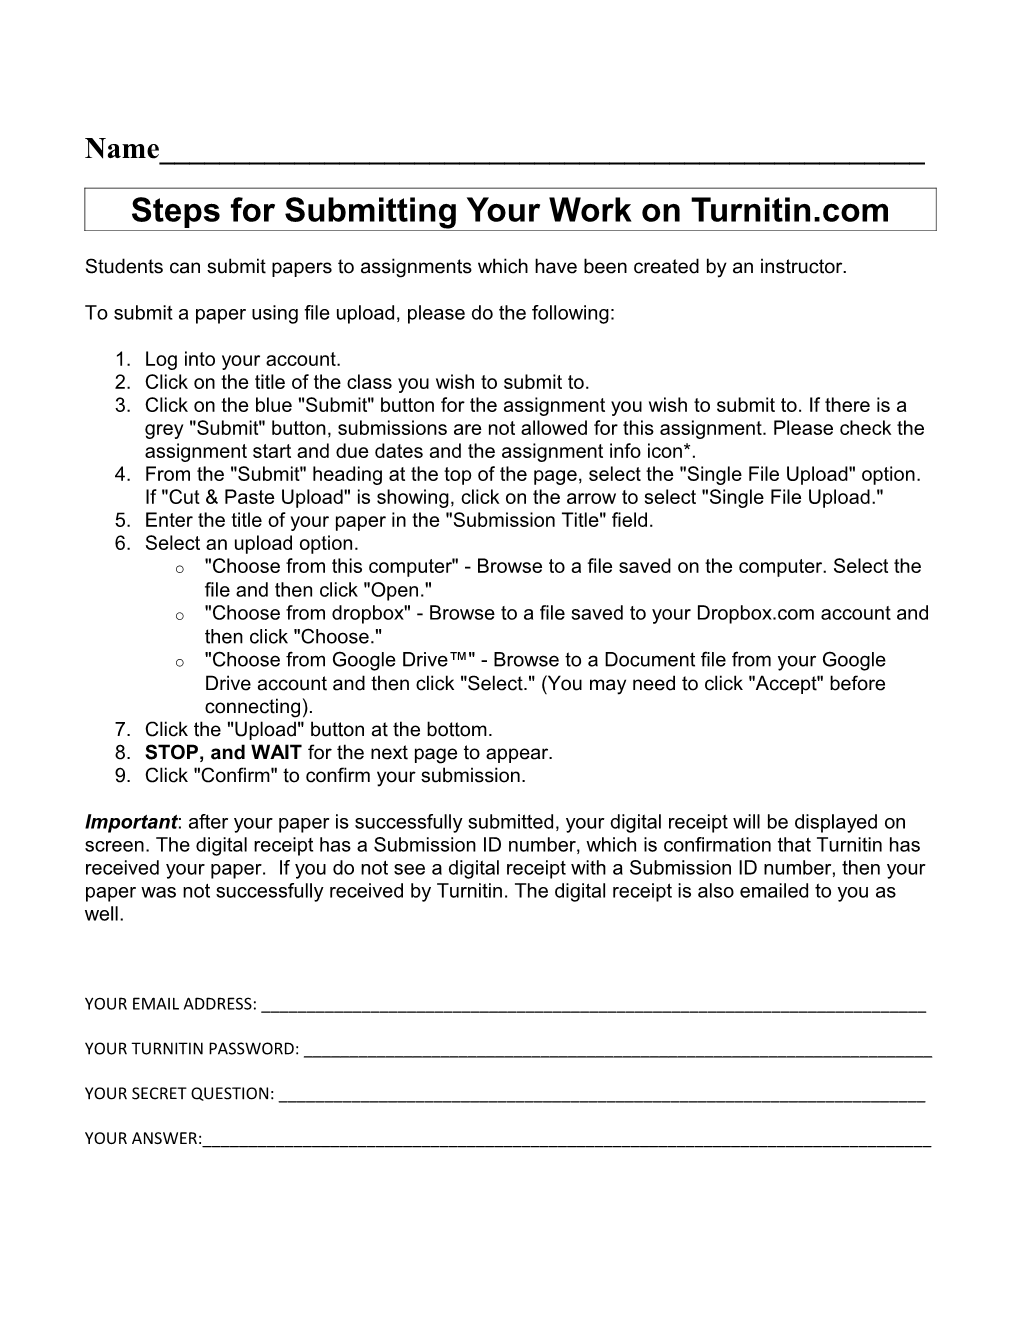 Steps for Submitting Your Work on Turnitin.Com